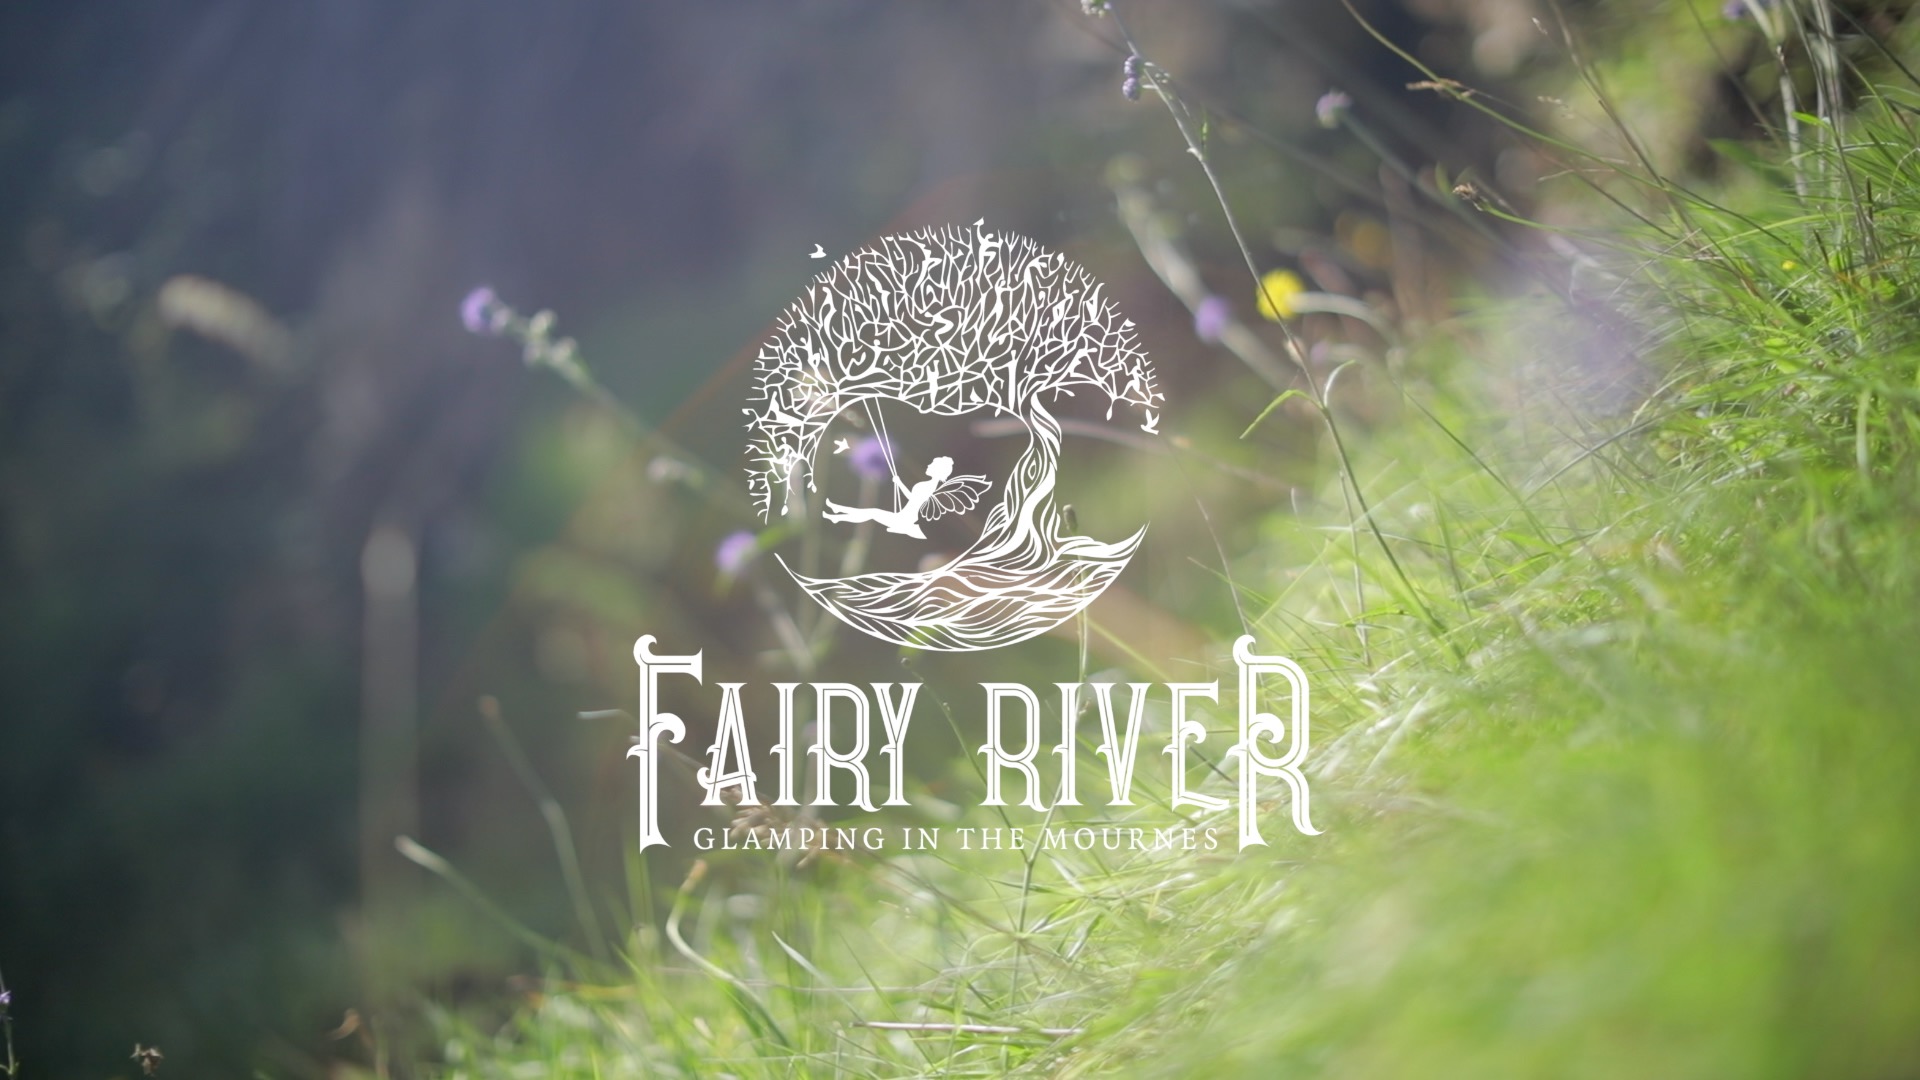 Making Magical Memories With Fairy Rivers New Video Production